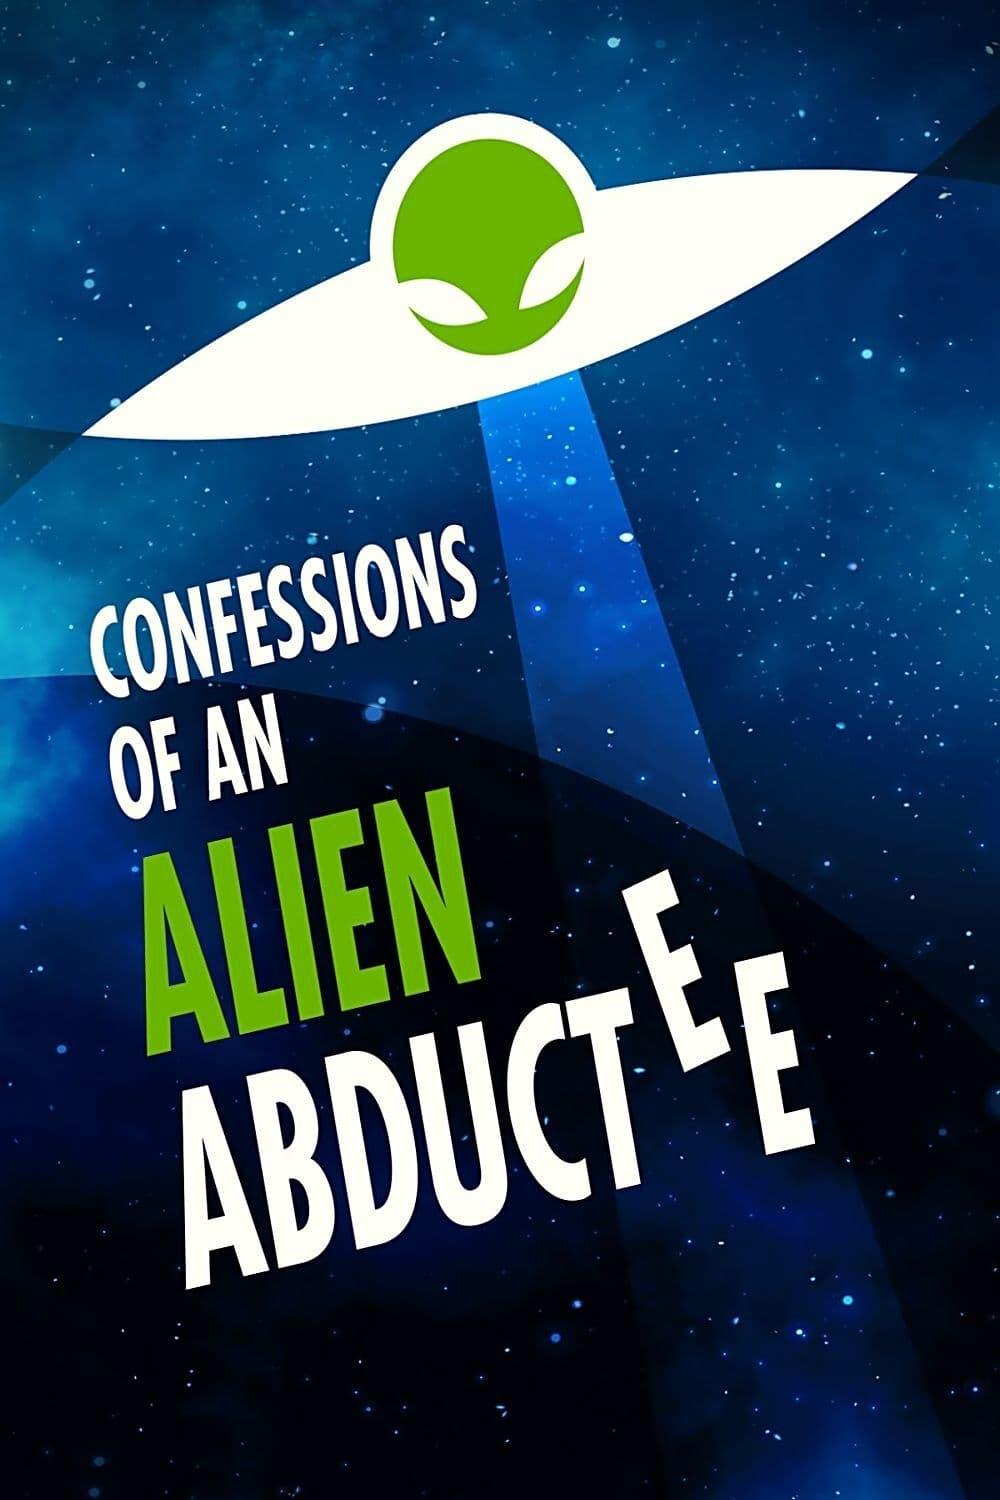 Confessions Of An Alien Abductee poster